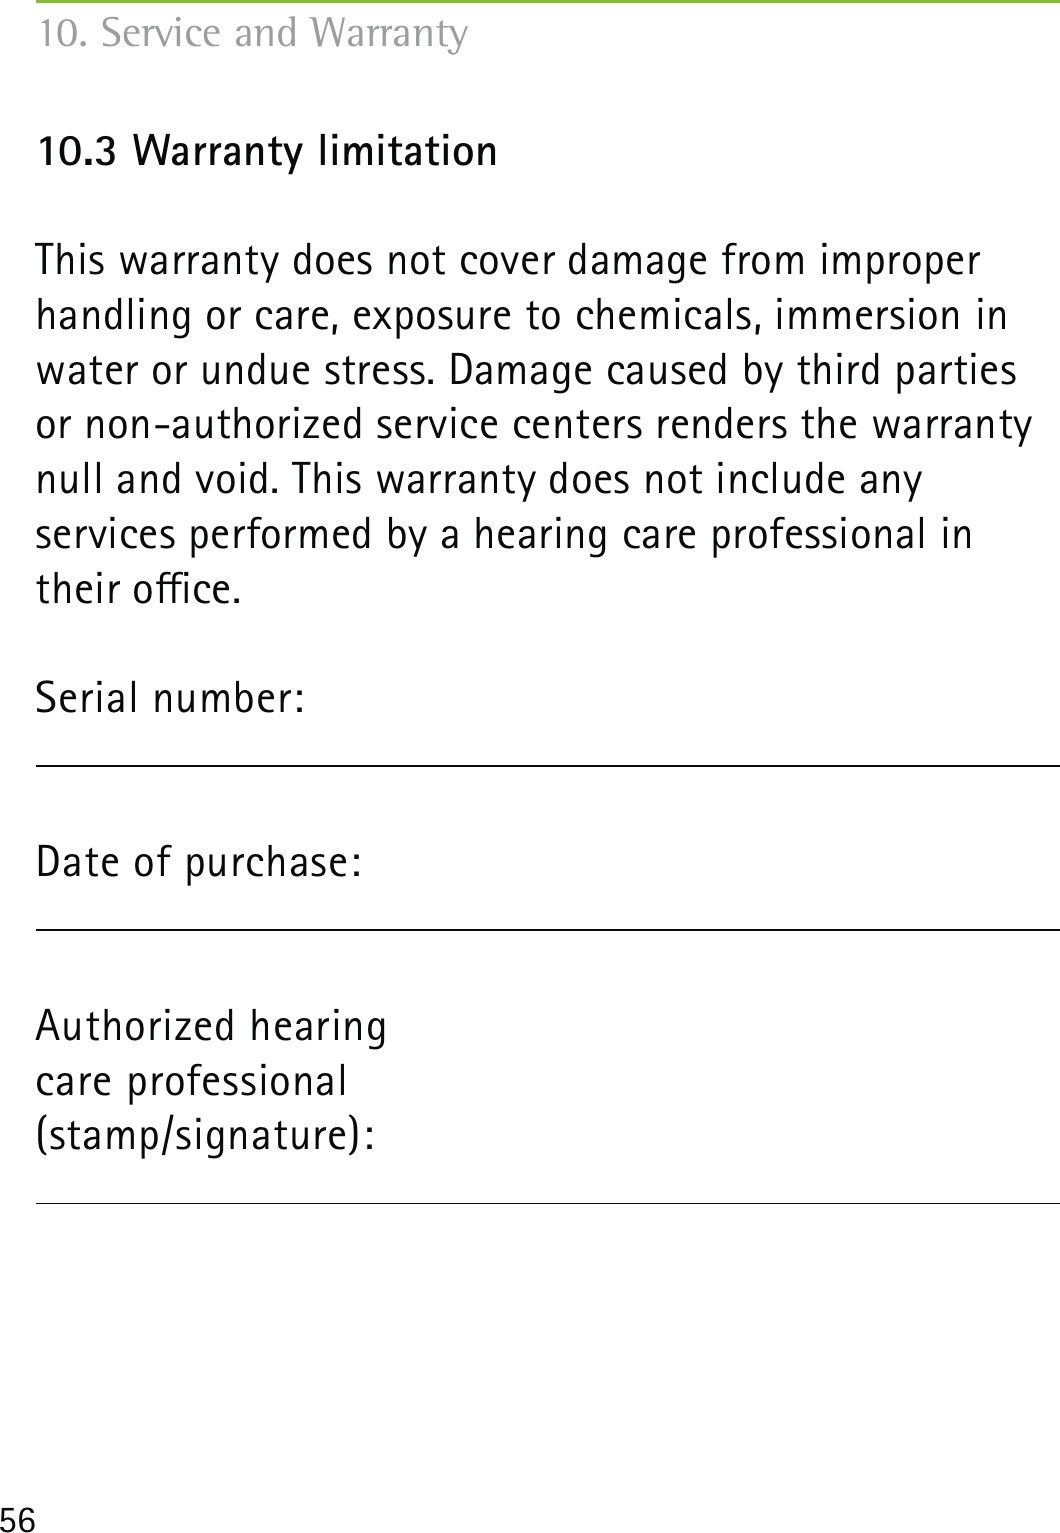 5610.3 Warranty limitationThis warranty does not cover damage from improper handling or care, exposure to chemicals, immersion in water or undue stress. Damage caused by third parties or non-authorized service centers renders the warranty null and void. This warranty does not include any  services performed by a hearing care professional in their oce.Serial number:Date of purchase:  Authorized hearing  care professional (stamp/signature): 10. Service and Warranty